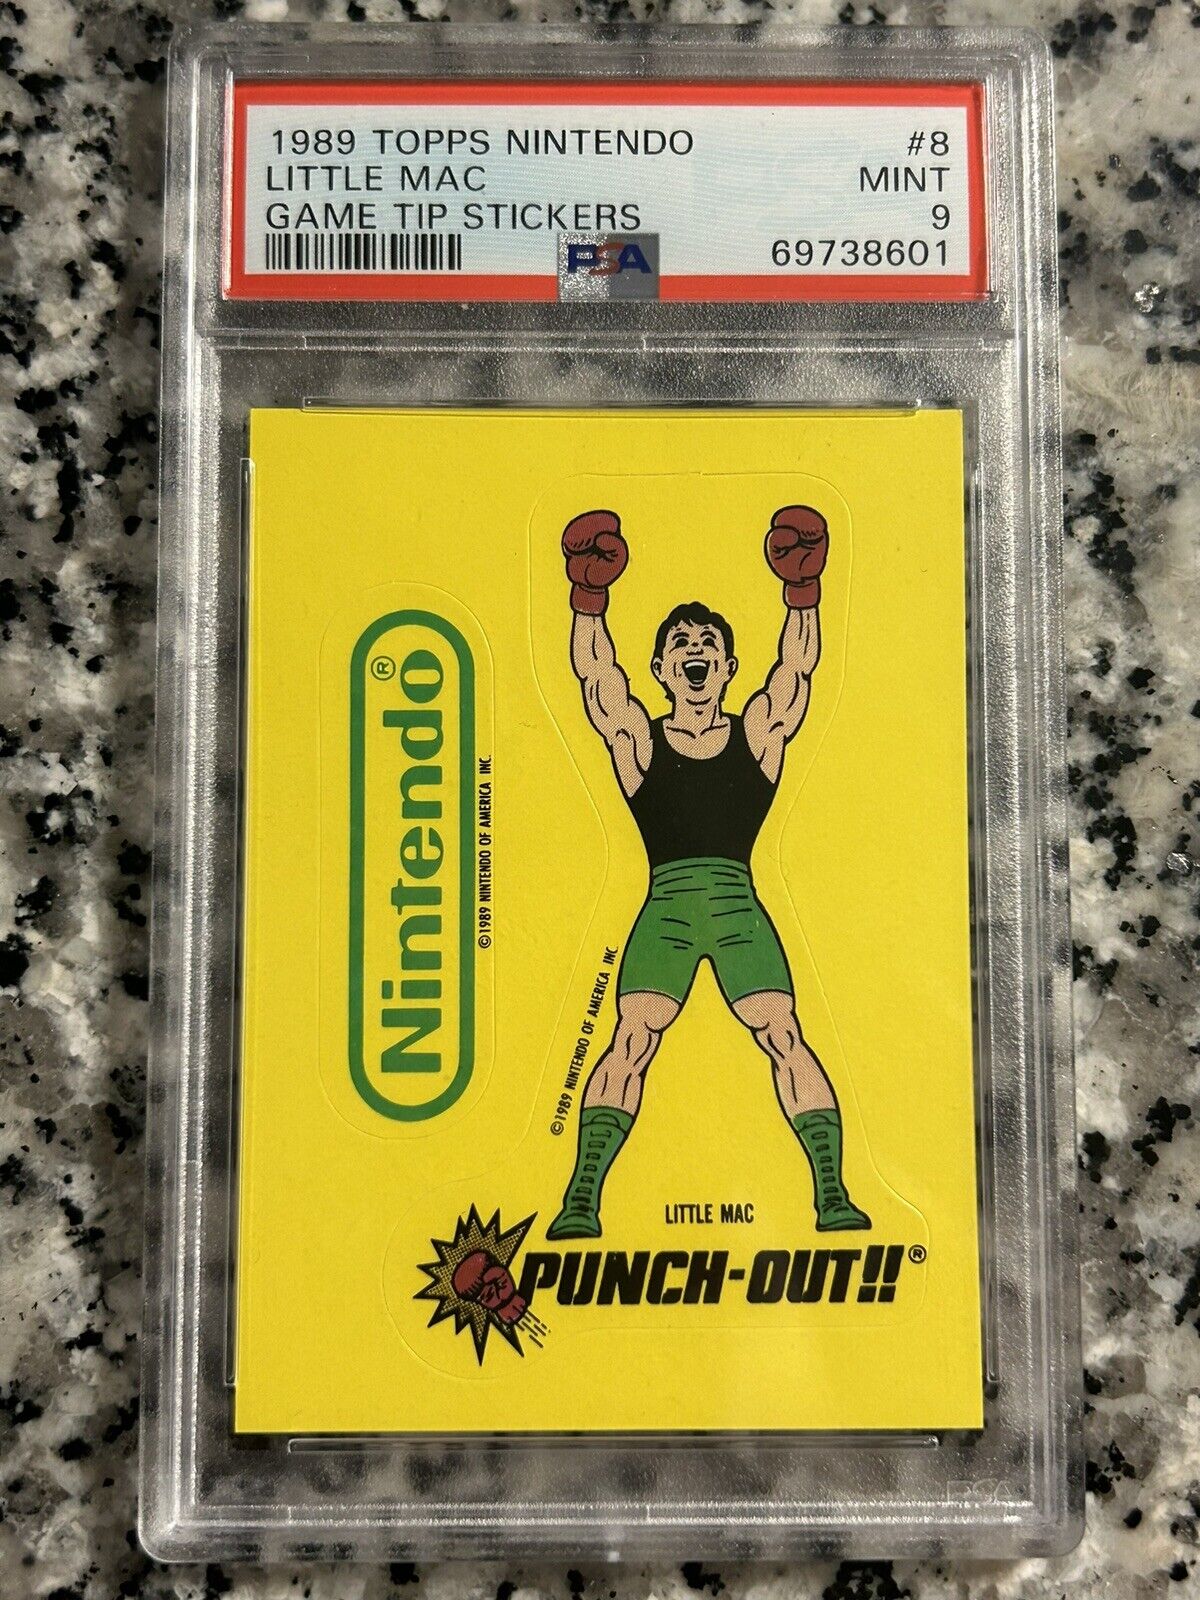 1989 Topps Nintendo Game Tips Stickers #8 Little Mac, Punch-Out PSA 9 MINT